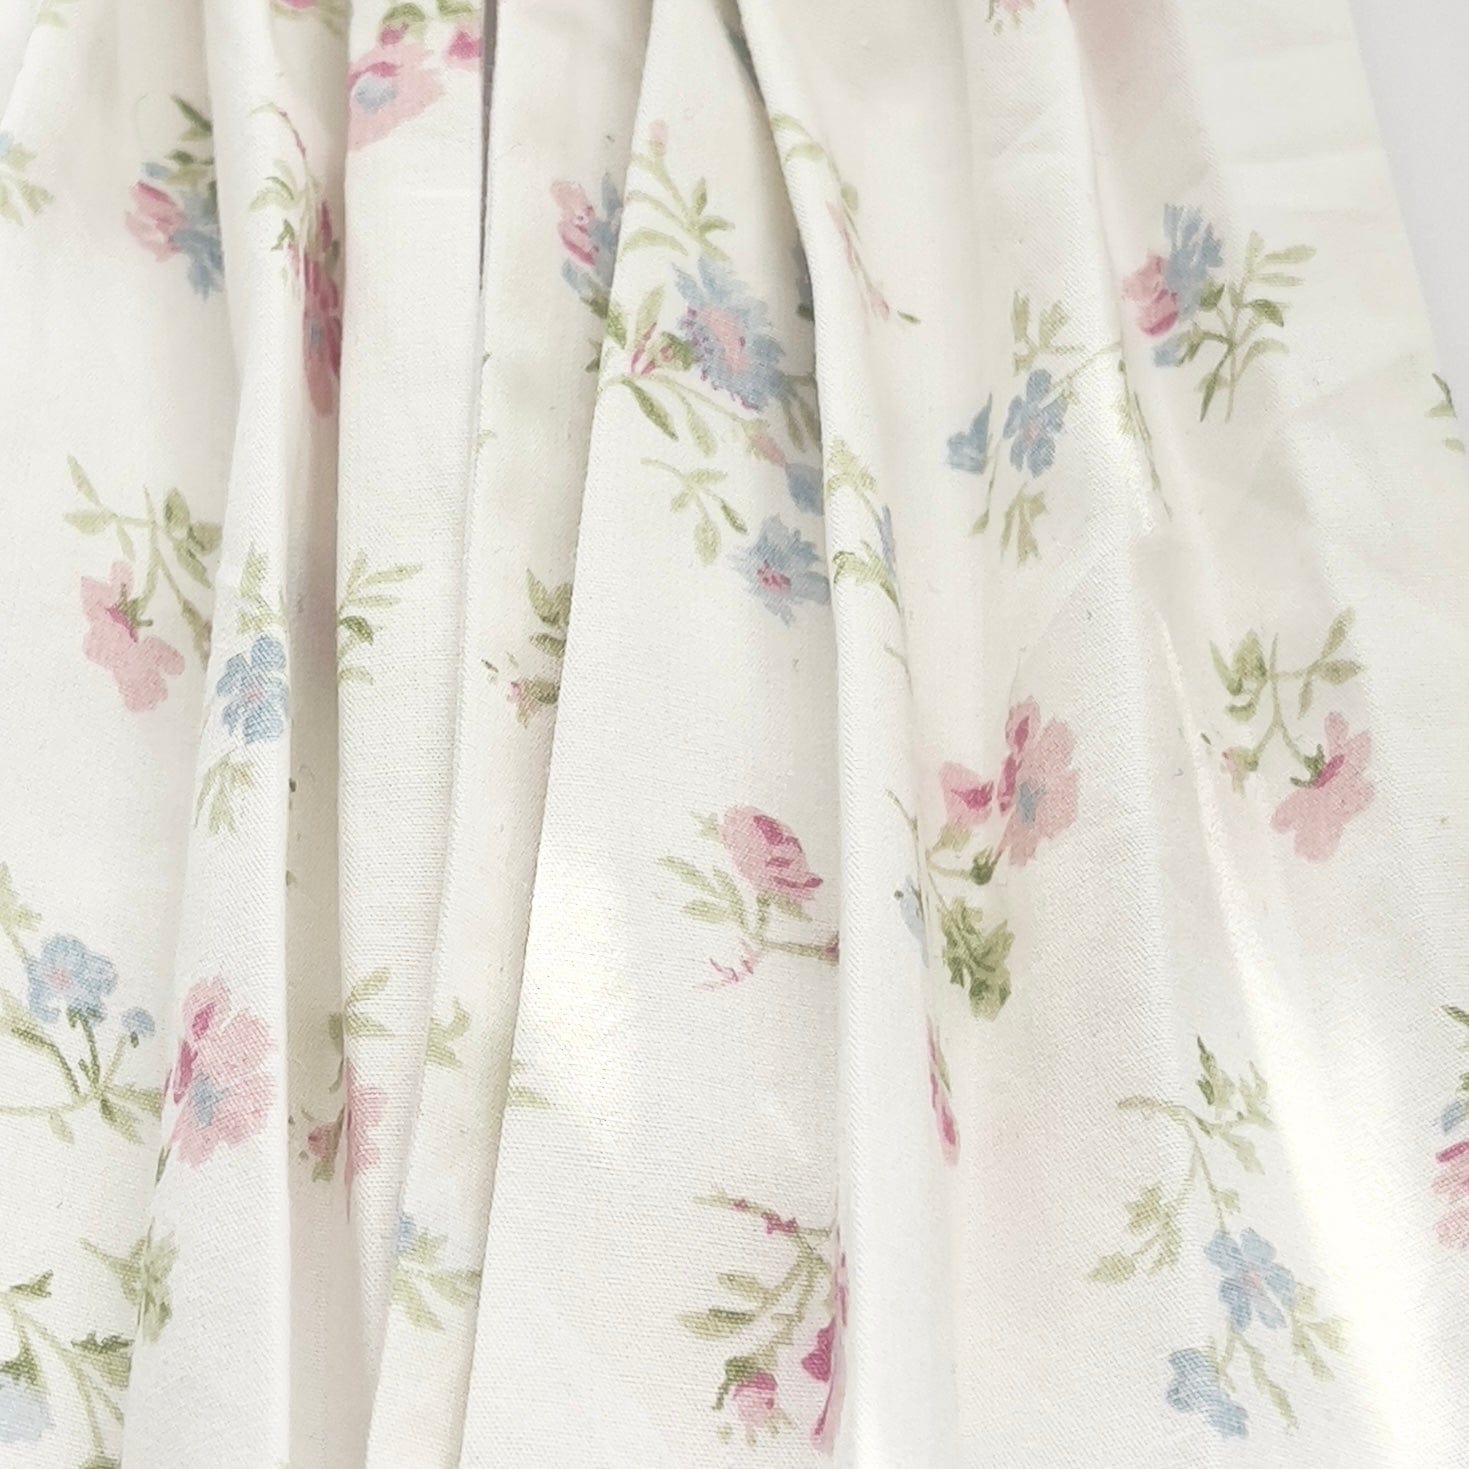 Chantallena Doll House Dollhouse Accessories CURTAINS - Shabby Pink Blue and Green Petite Wildflowers 2 Panel Cotton Curtains | Shabby Wildflowers | Soft Furnishings